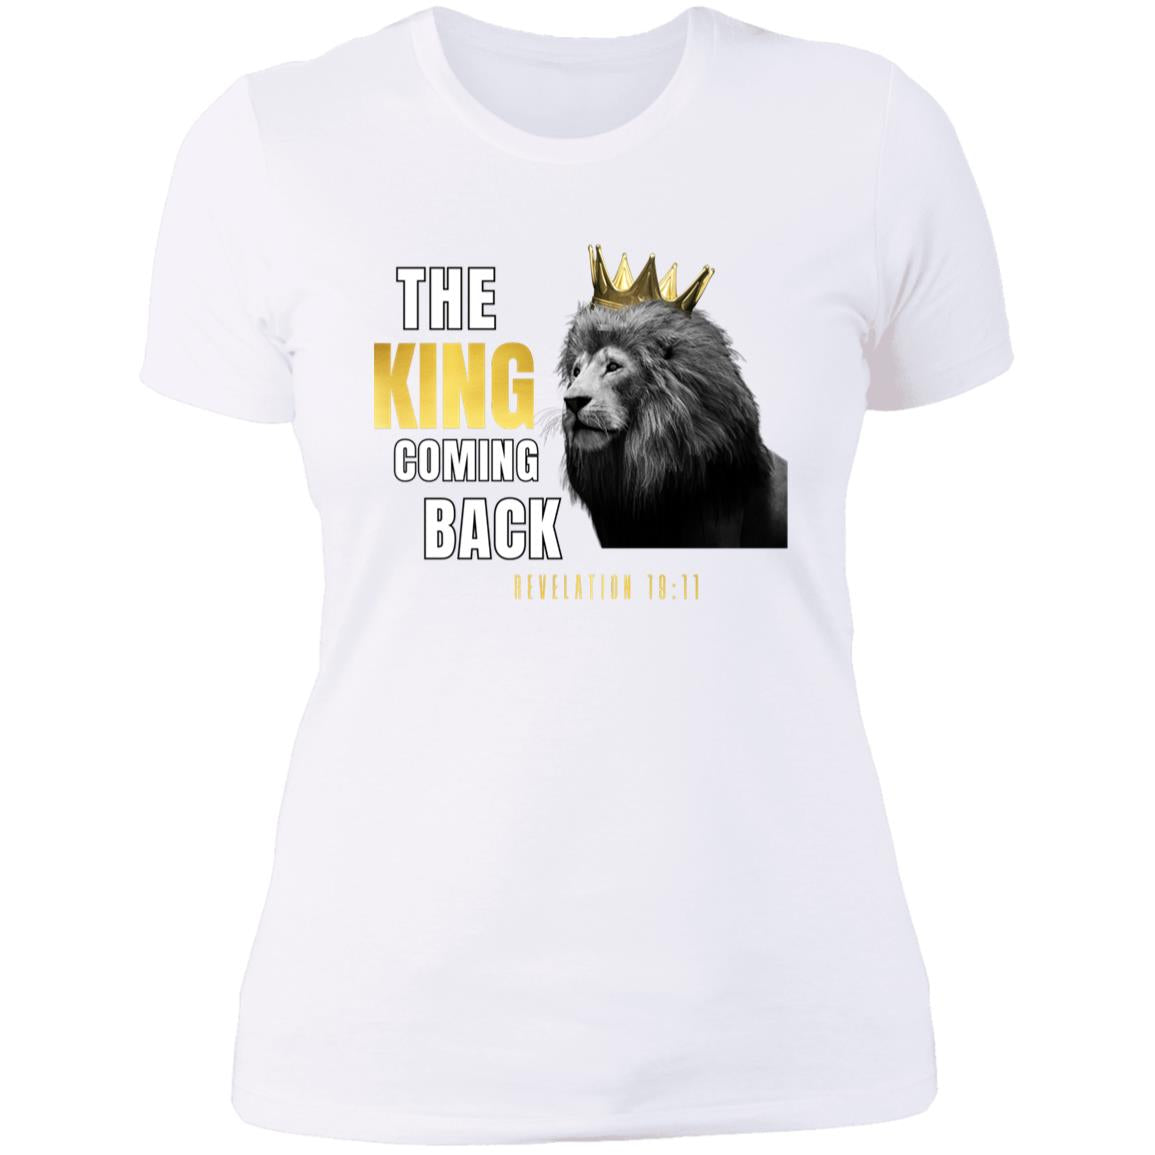 The KING Coming Back Ladies'  T-Shirt